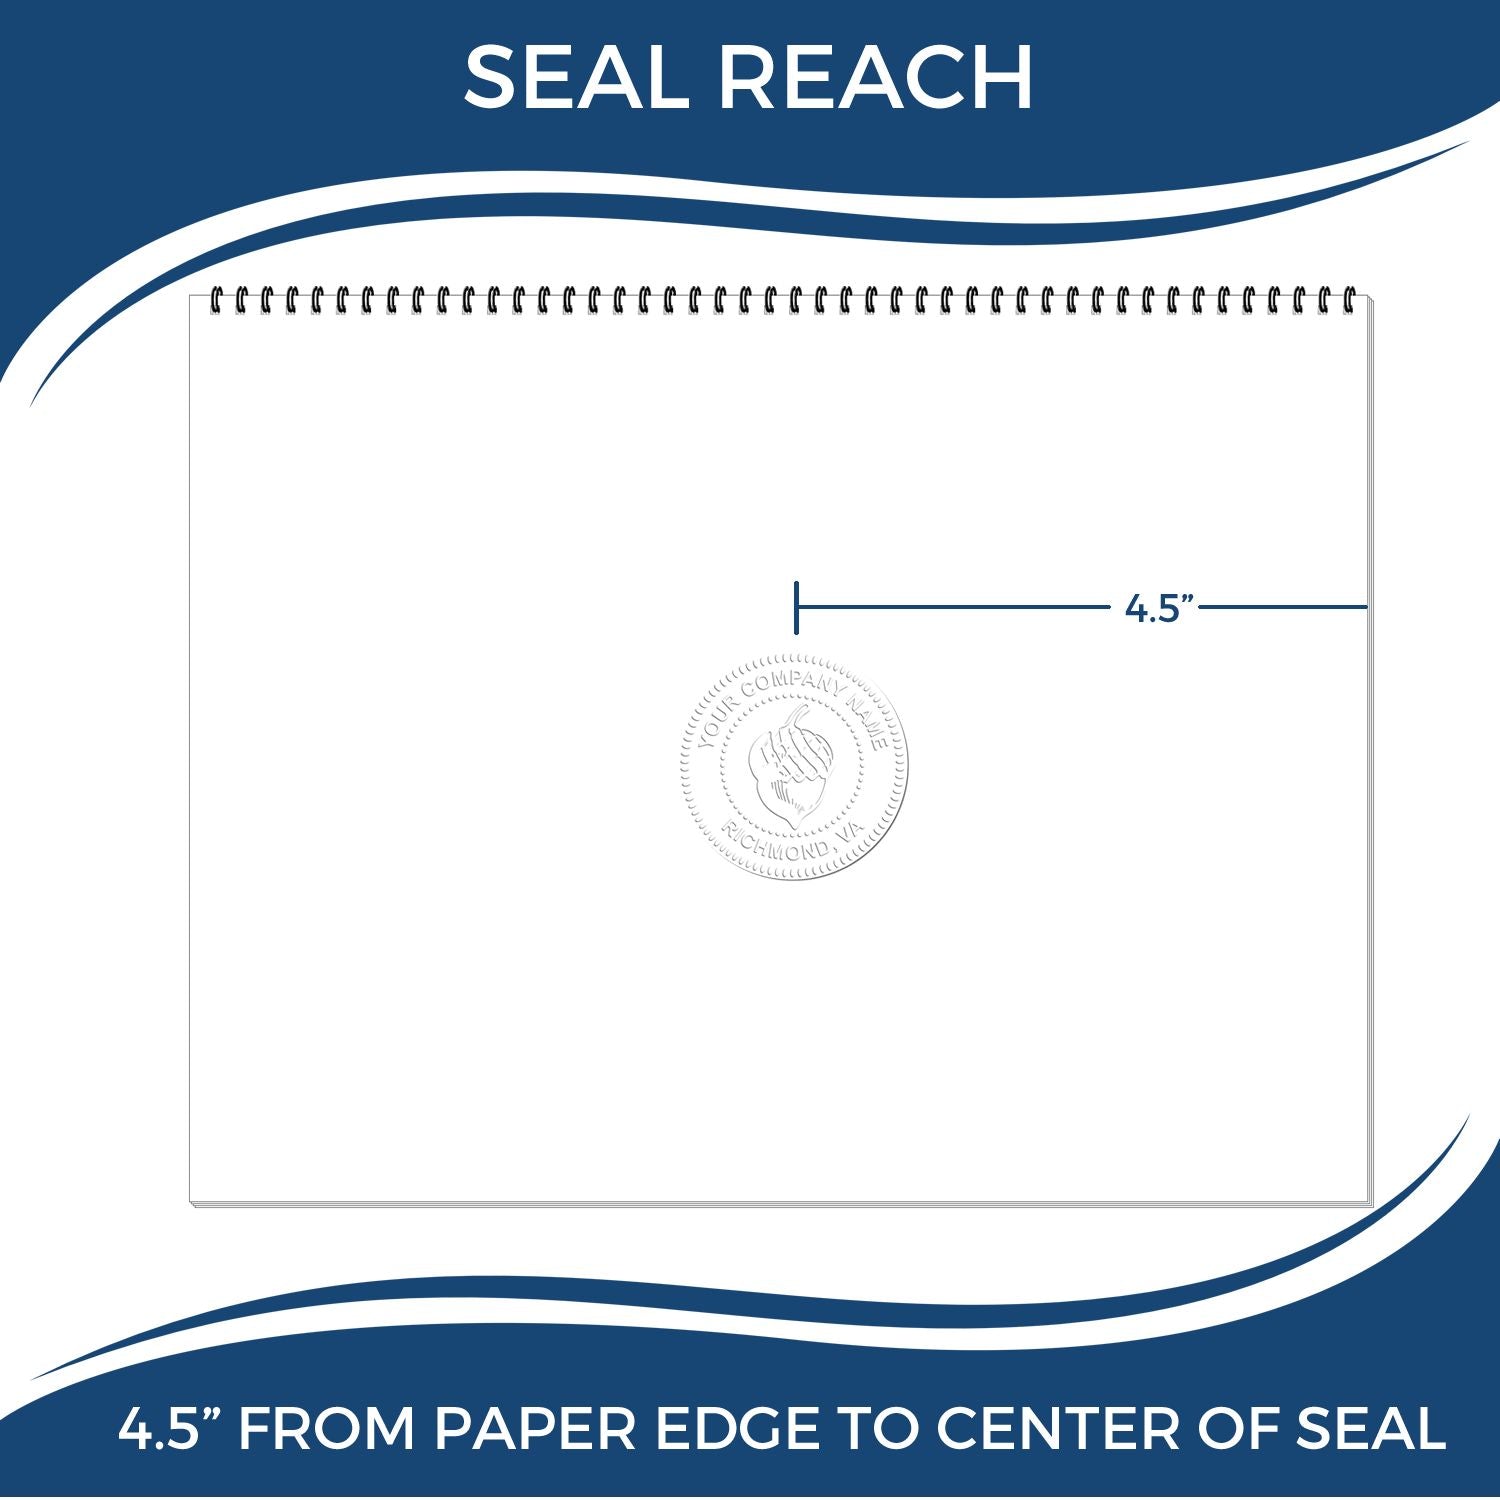 An infographic showing the seal reach which is represented by a ruler and a miniature seal image of the Extended Long Reach Connecticut Architect Seal Embosser